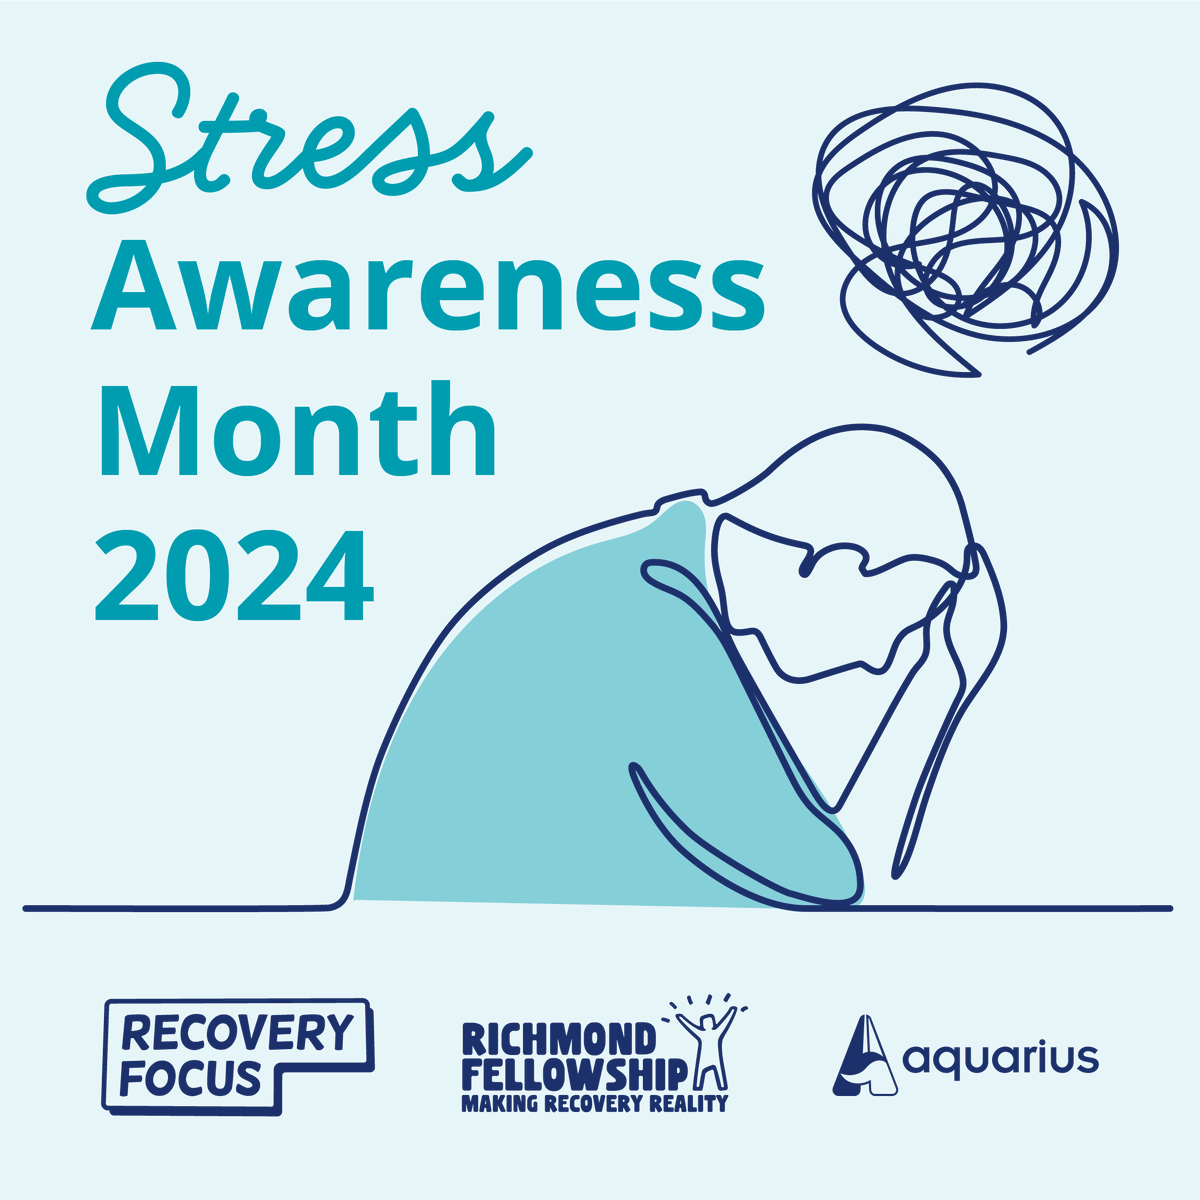 It's #StressAwarenessMonth and we’re getting behind the idea that “a little becomes a lot” when you’re consistent with implementing, small, positive steps into your daily routine. Across April, we're sharing steps you can take to contribute to your wellbeing in a huge way!